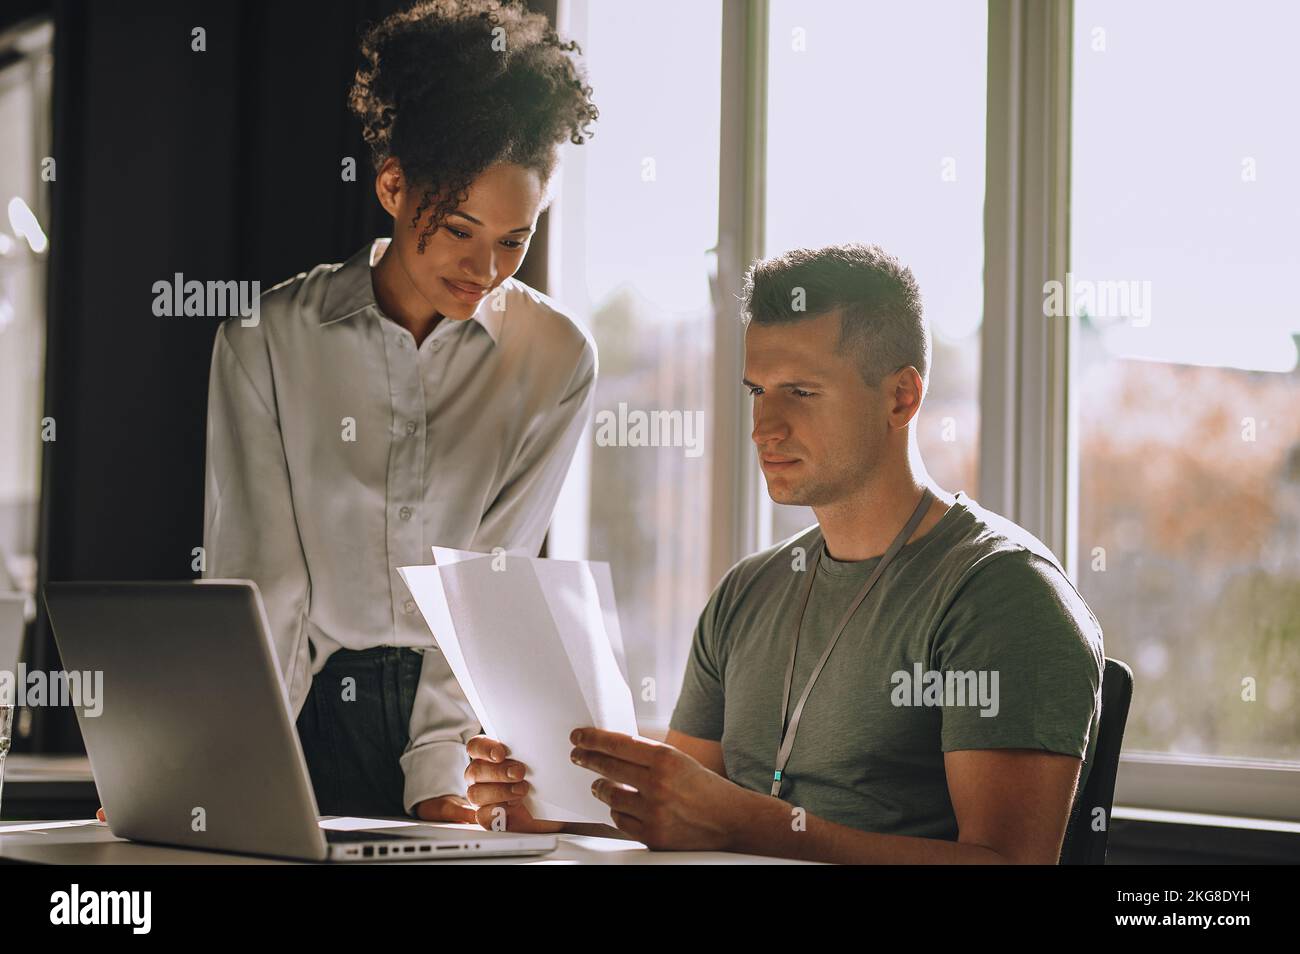 Pleased female assistant looking at documents in her boss hands Stock Photo